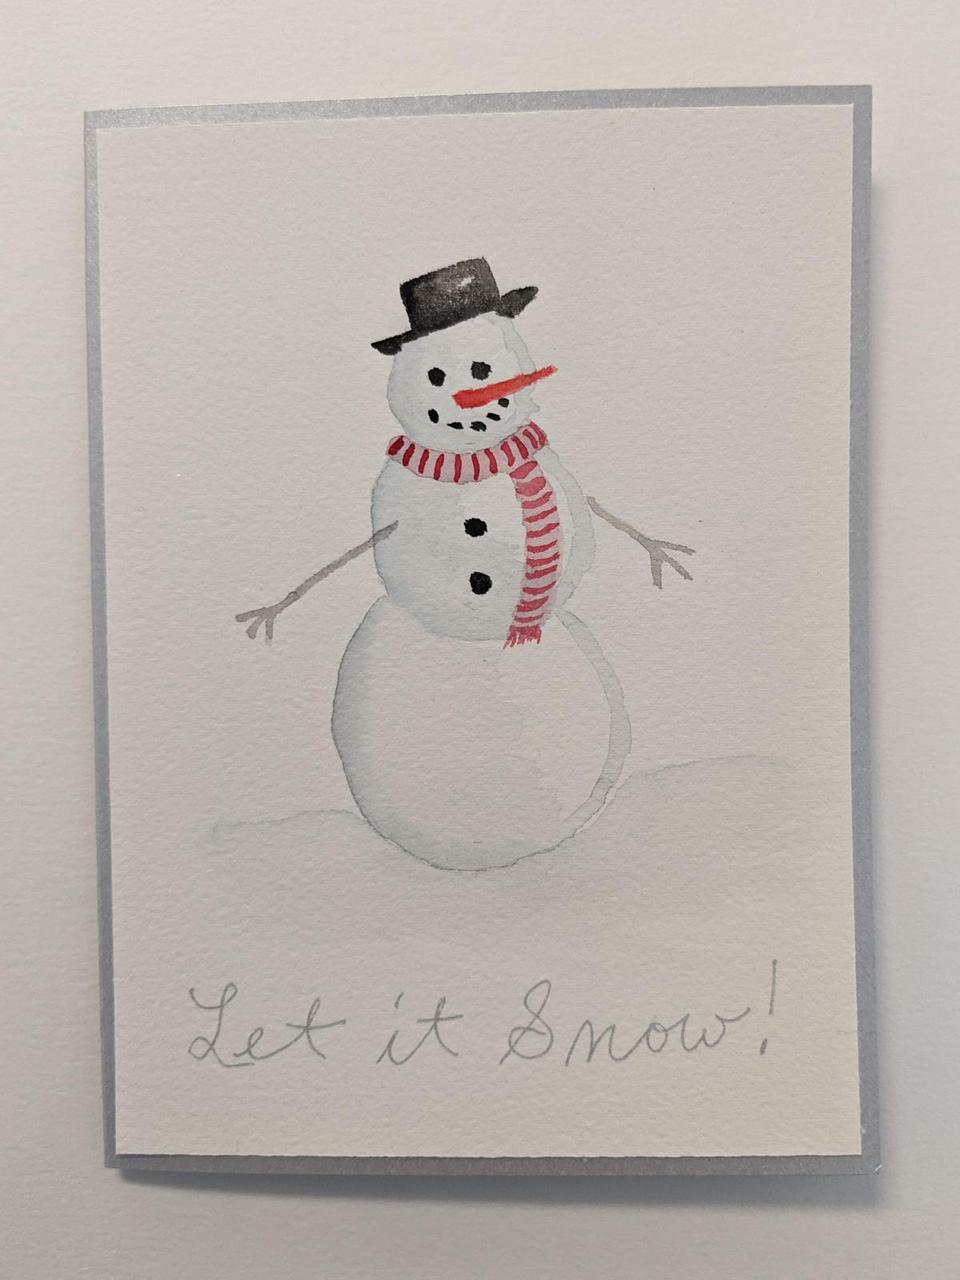 holiday card with a painting of a snowman on the front, with a carrot nose and coal eyes and mouth. It says "Let it Snow" across the bottom.